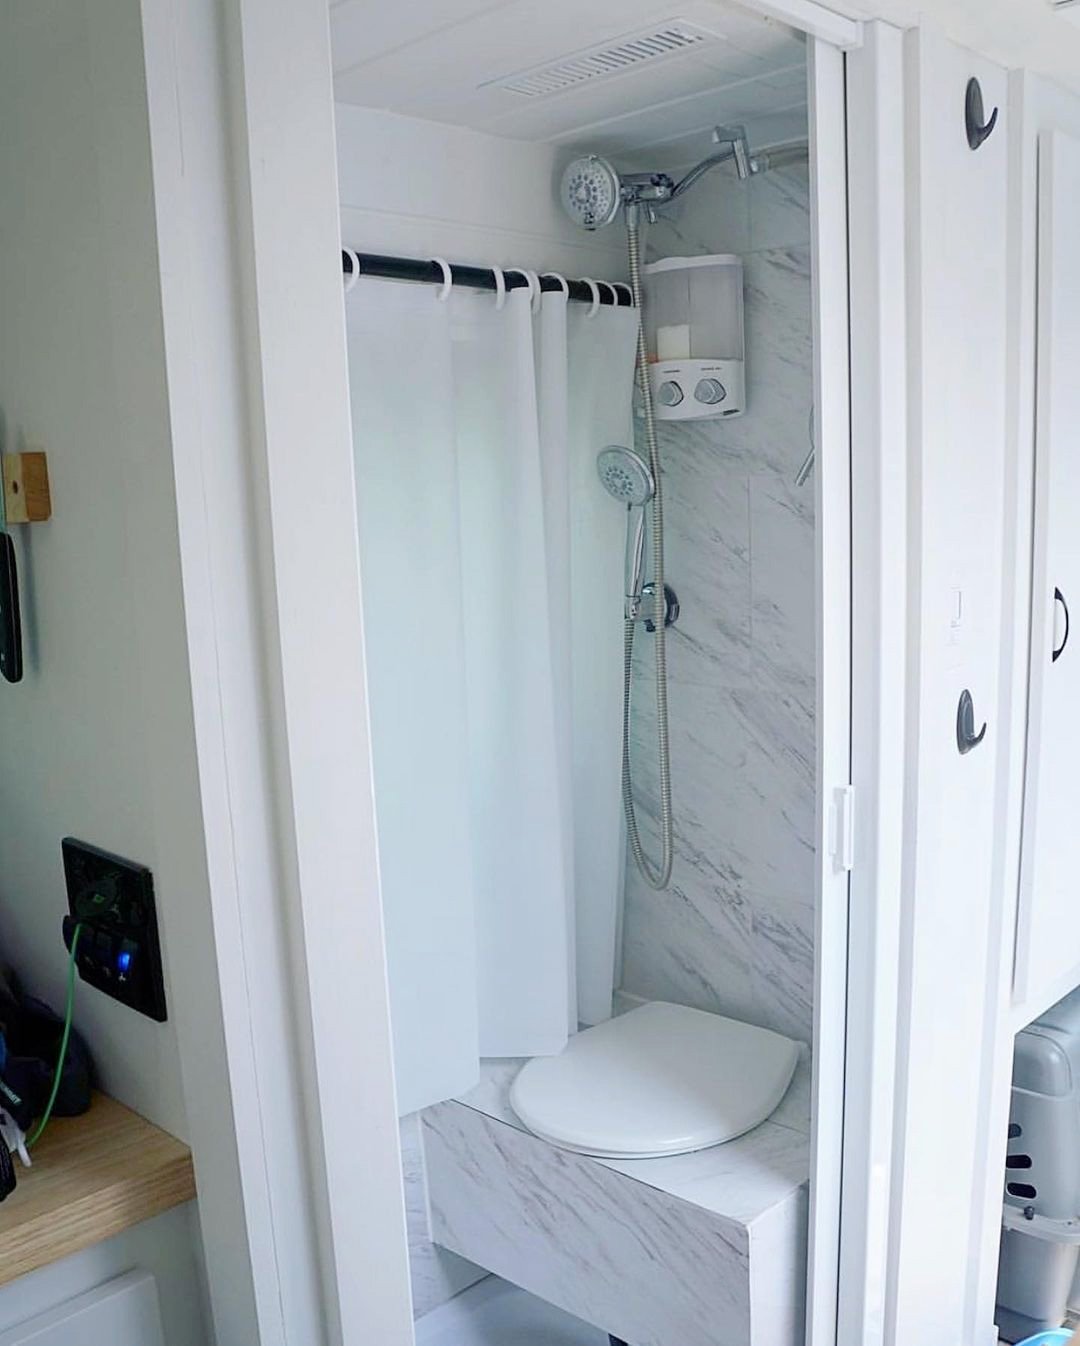 camper van with a toilet and shower wet room inside